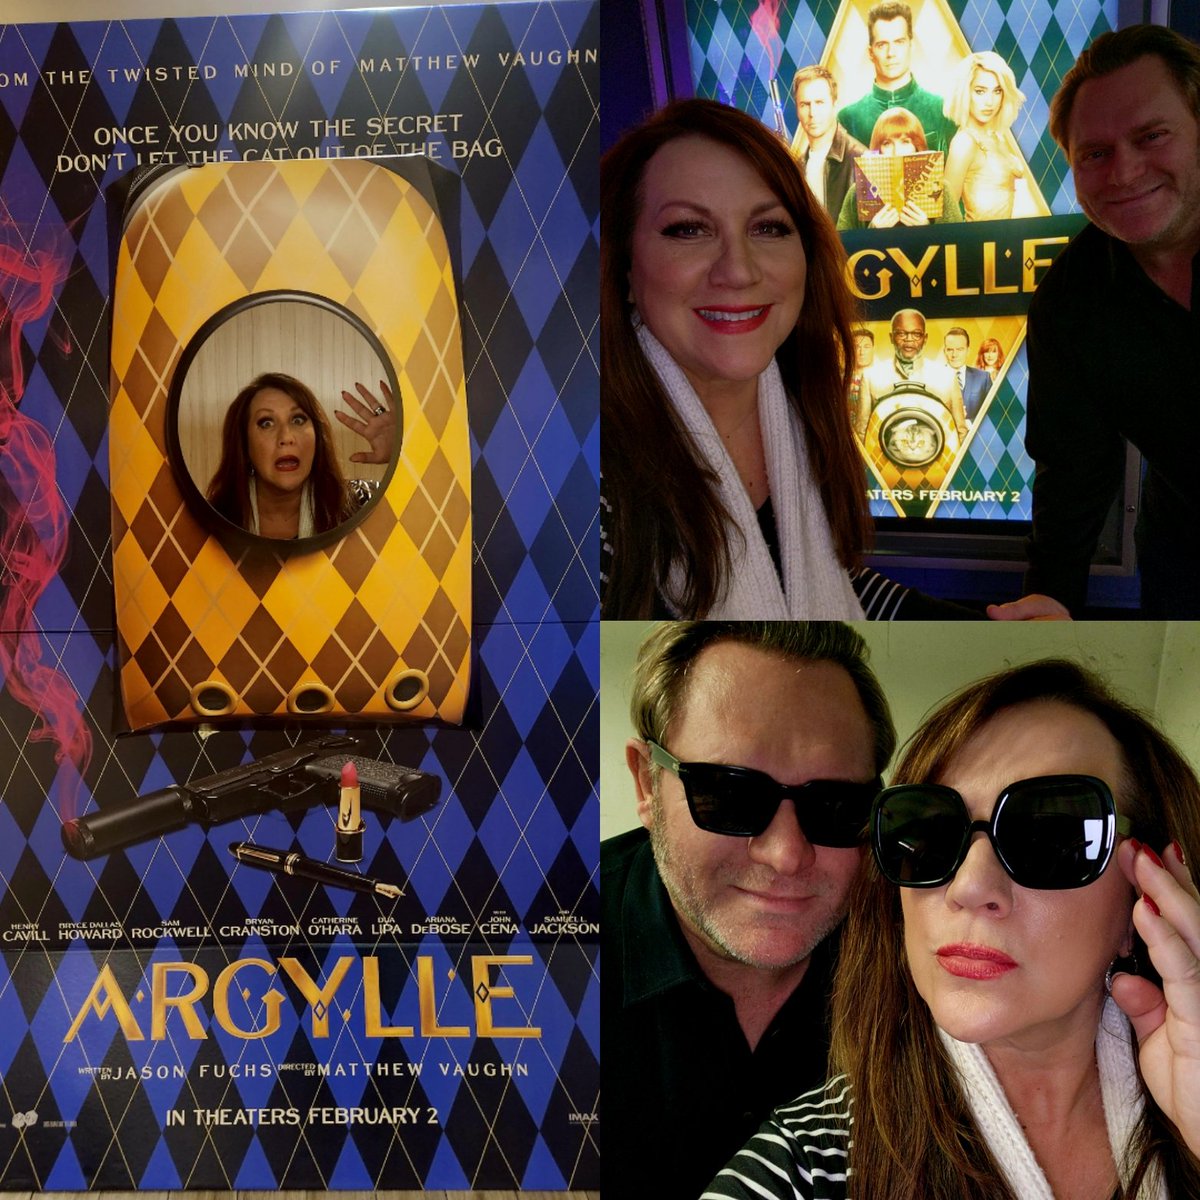 Well that was fun! I hosted an @argyllemovie advanced screening and ohhhh what a ride!! Get ready for LOTS of twists & suprises...GREAT CAST (especially the cat) 😃🥂🤗👏👏👏🍿😸 @1043MYfm #ArgylleMovie